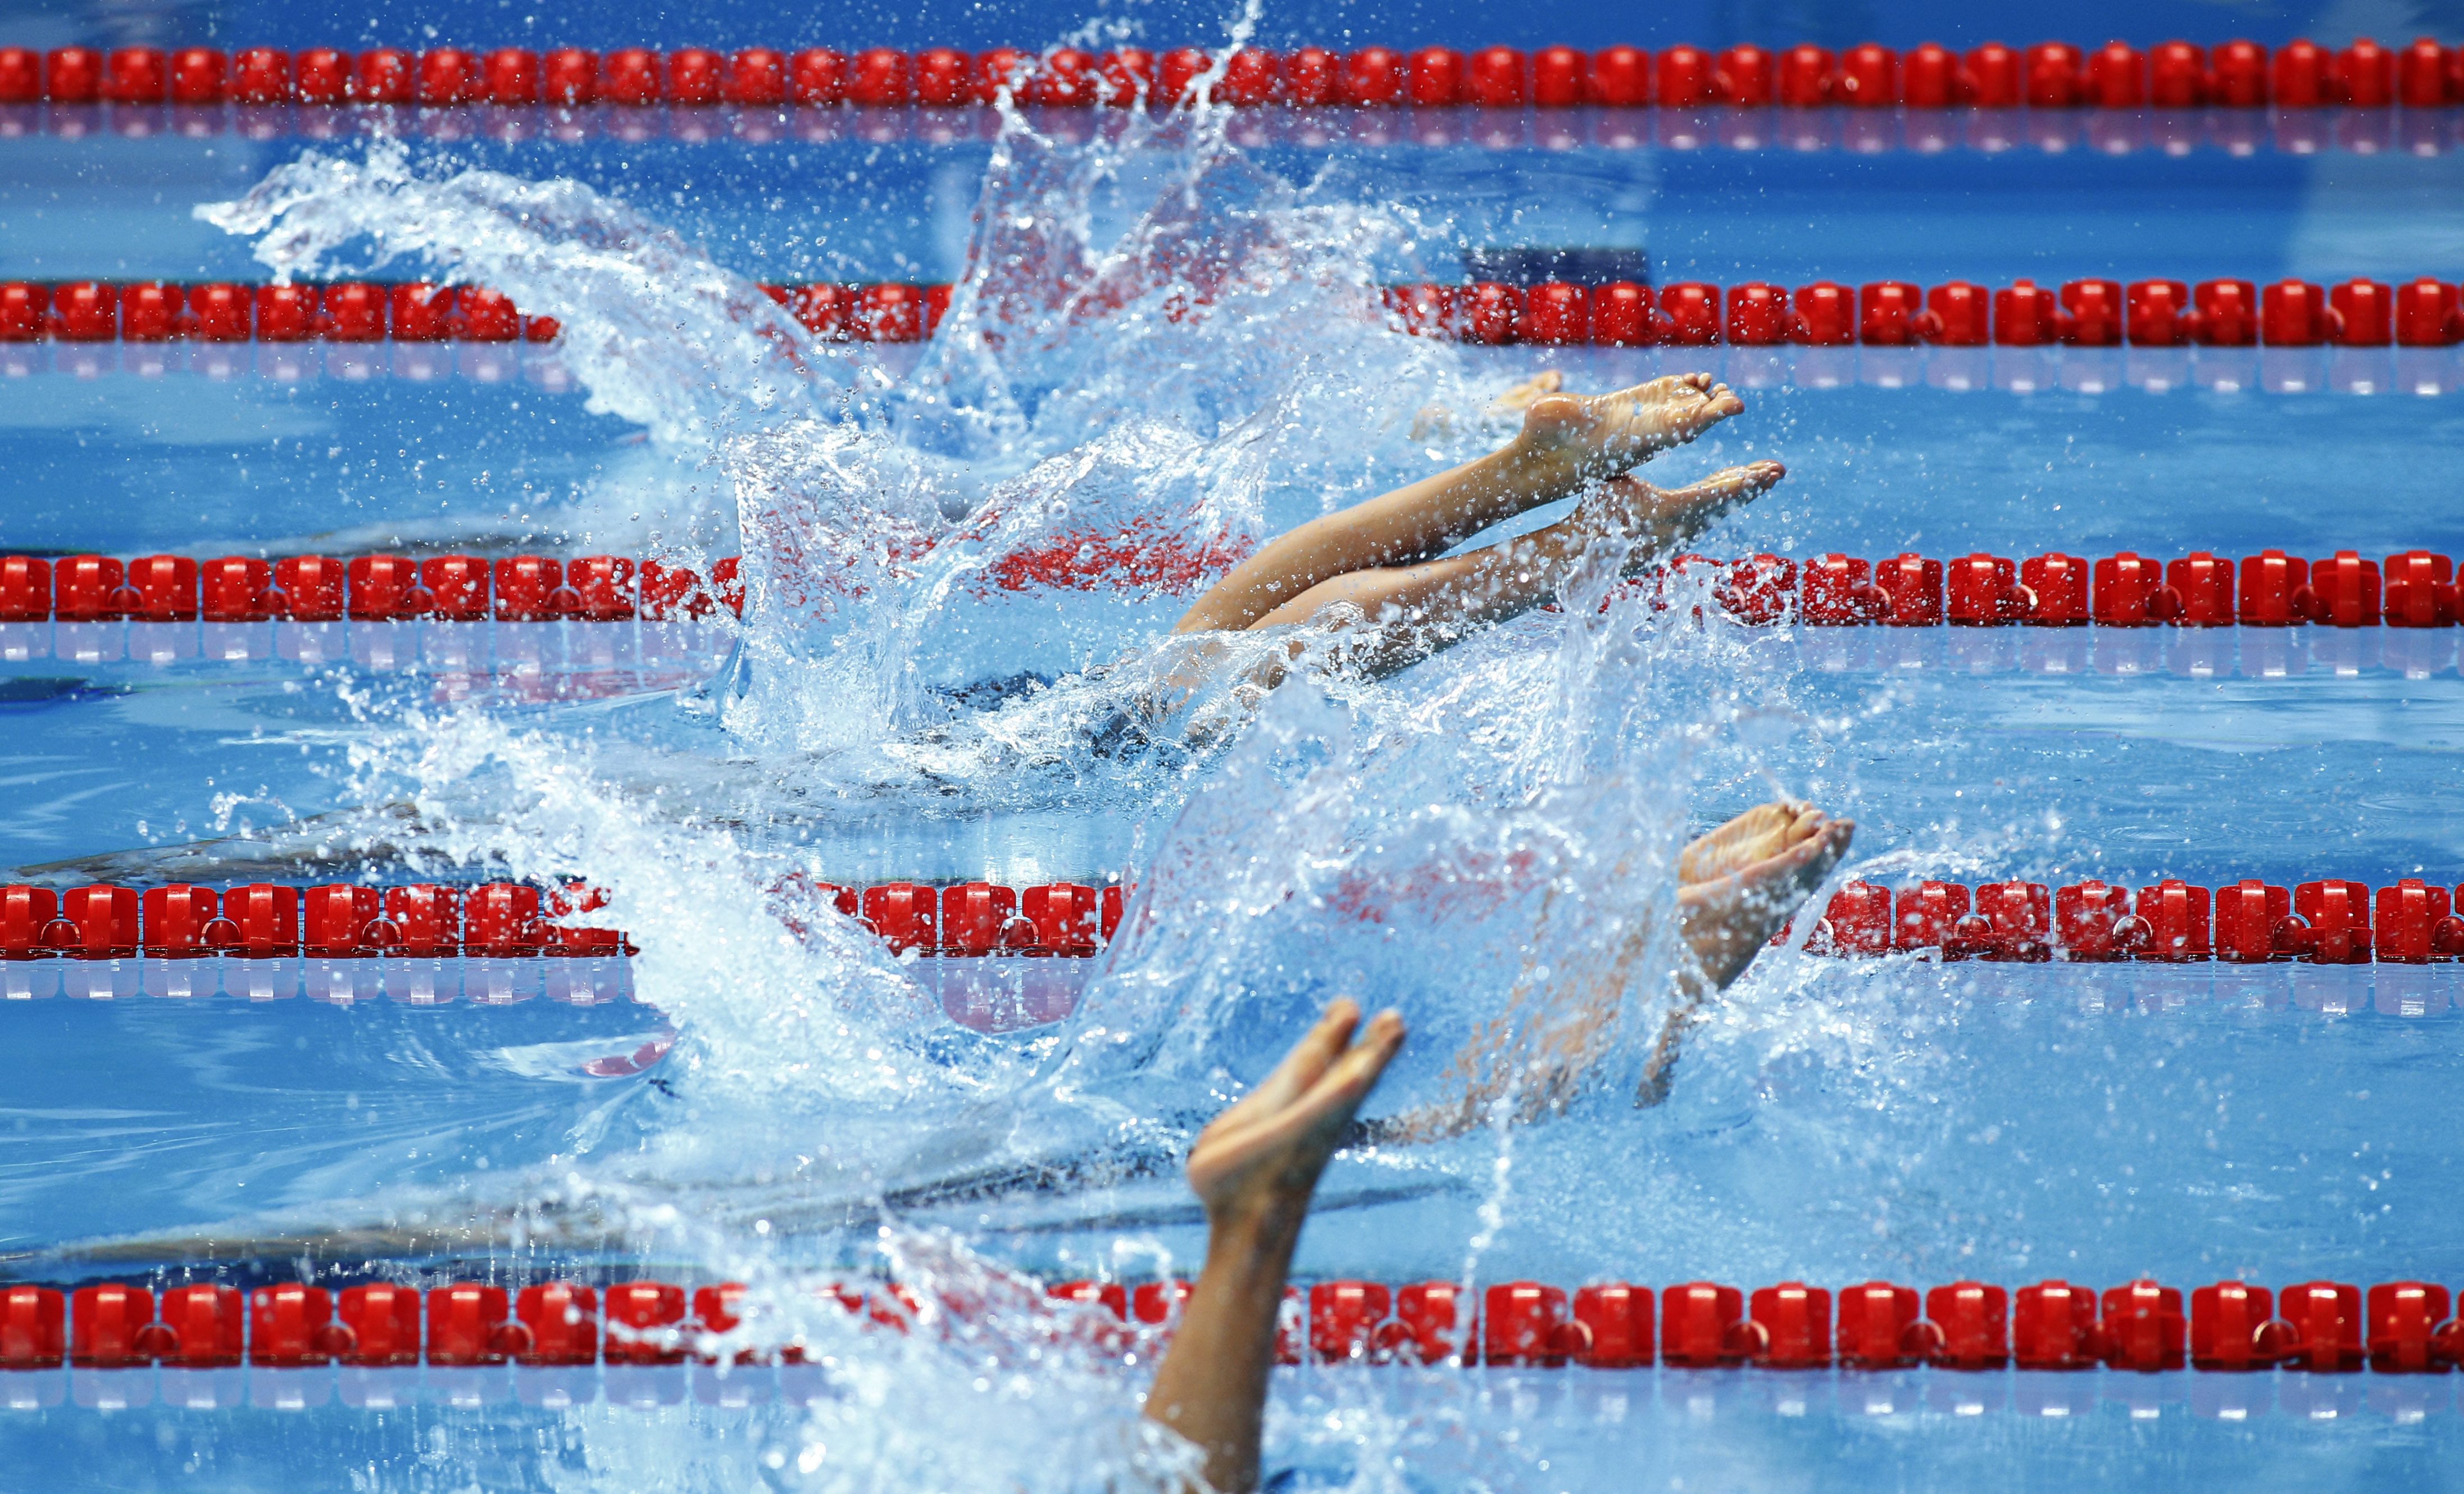 Athletes start a women's 4x200m freestyle relay heat at the Swimming World Championships in Kazan, Russia, Thursday, Aug. 6, 2015. (AP Photo/Sergei Grits)